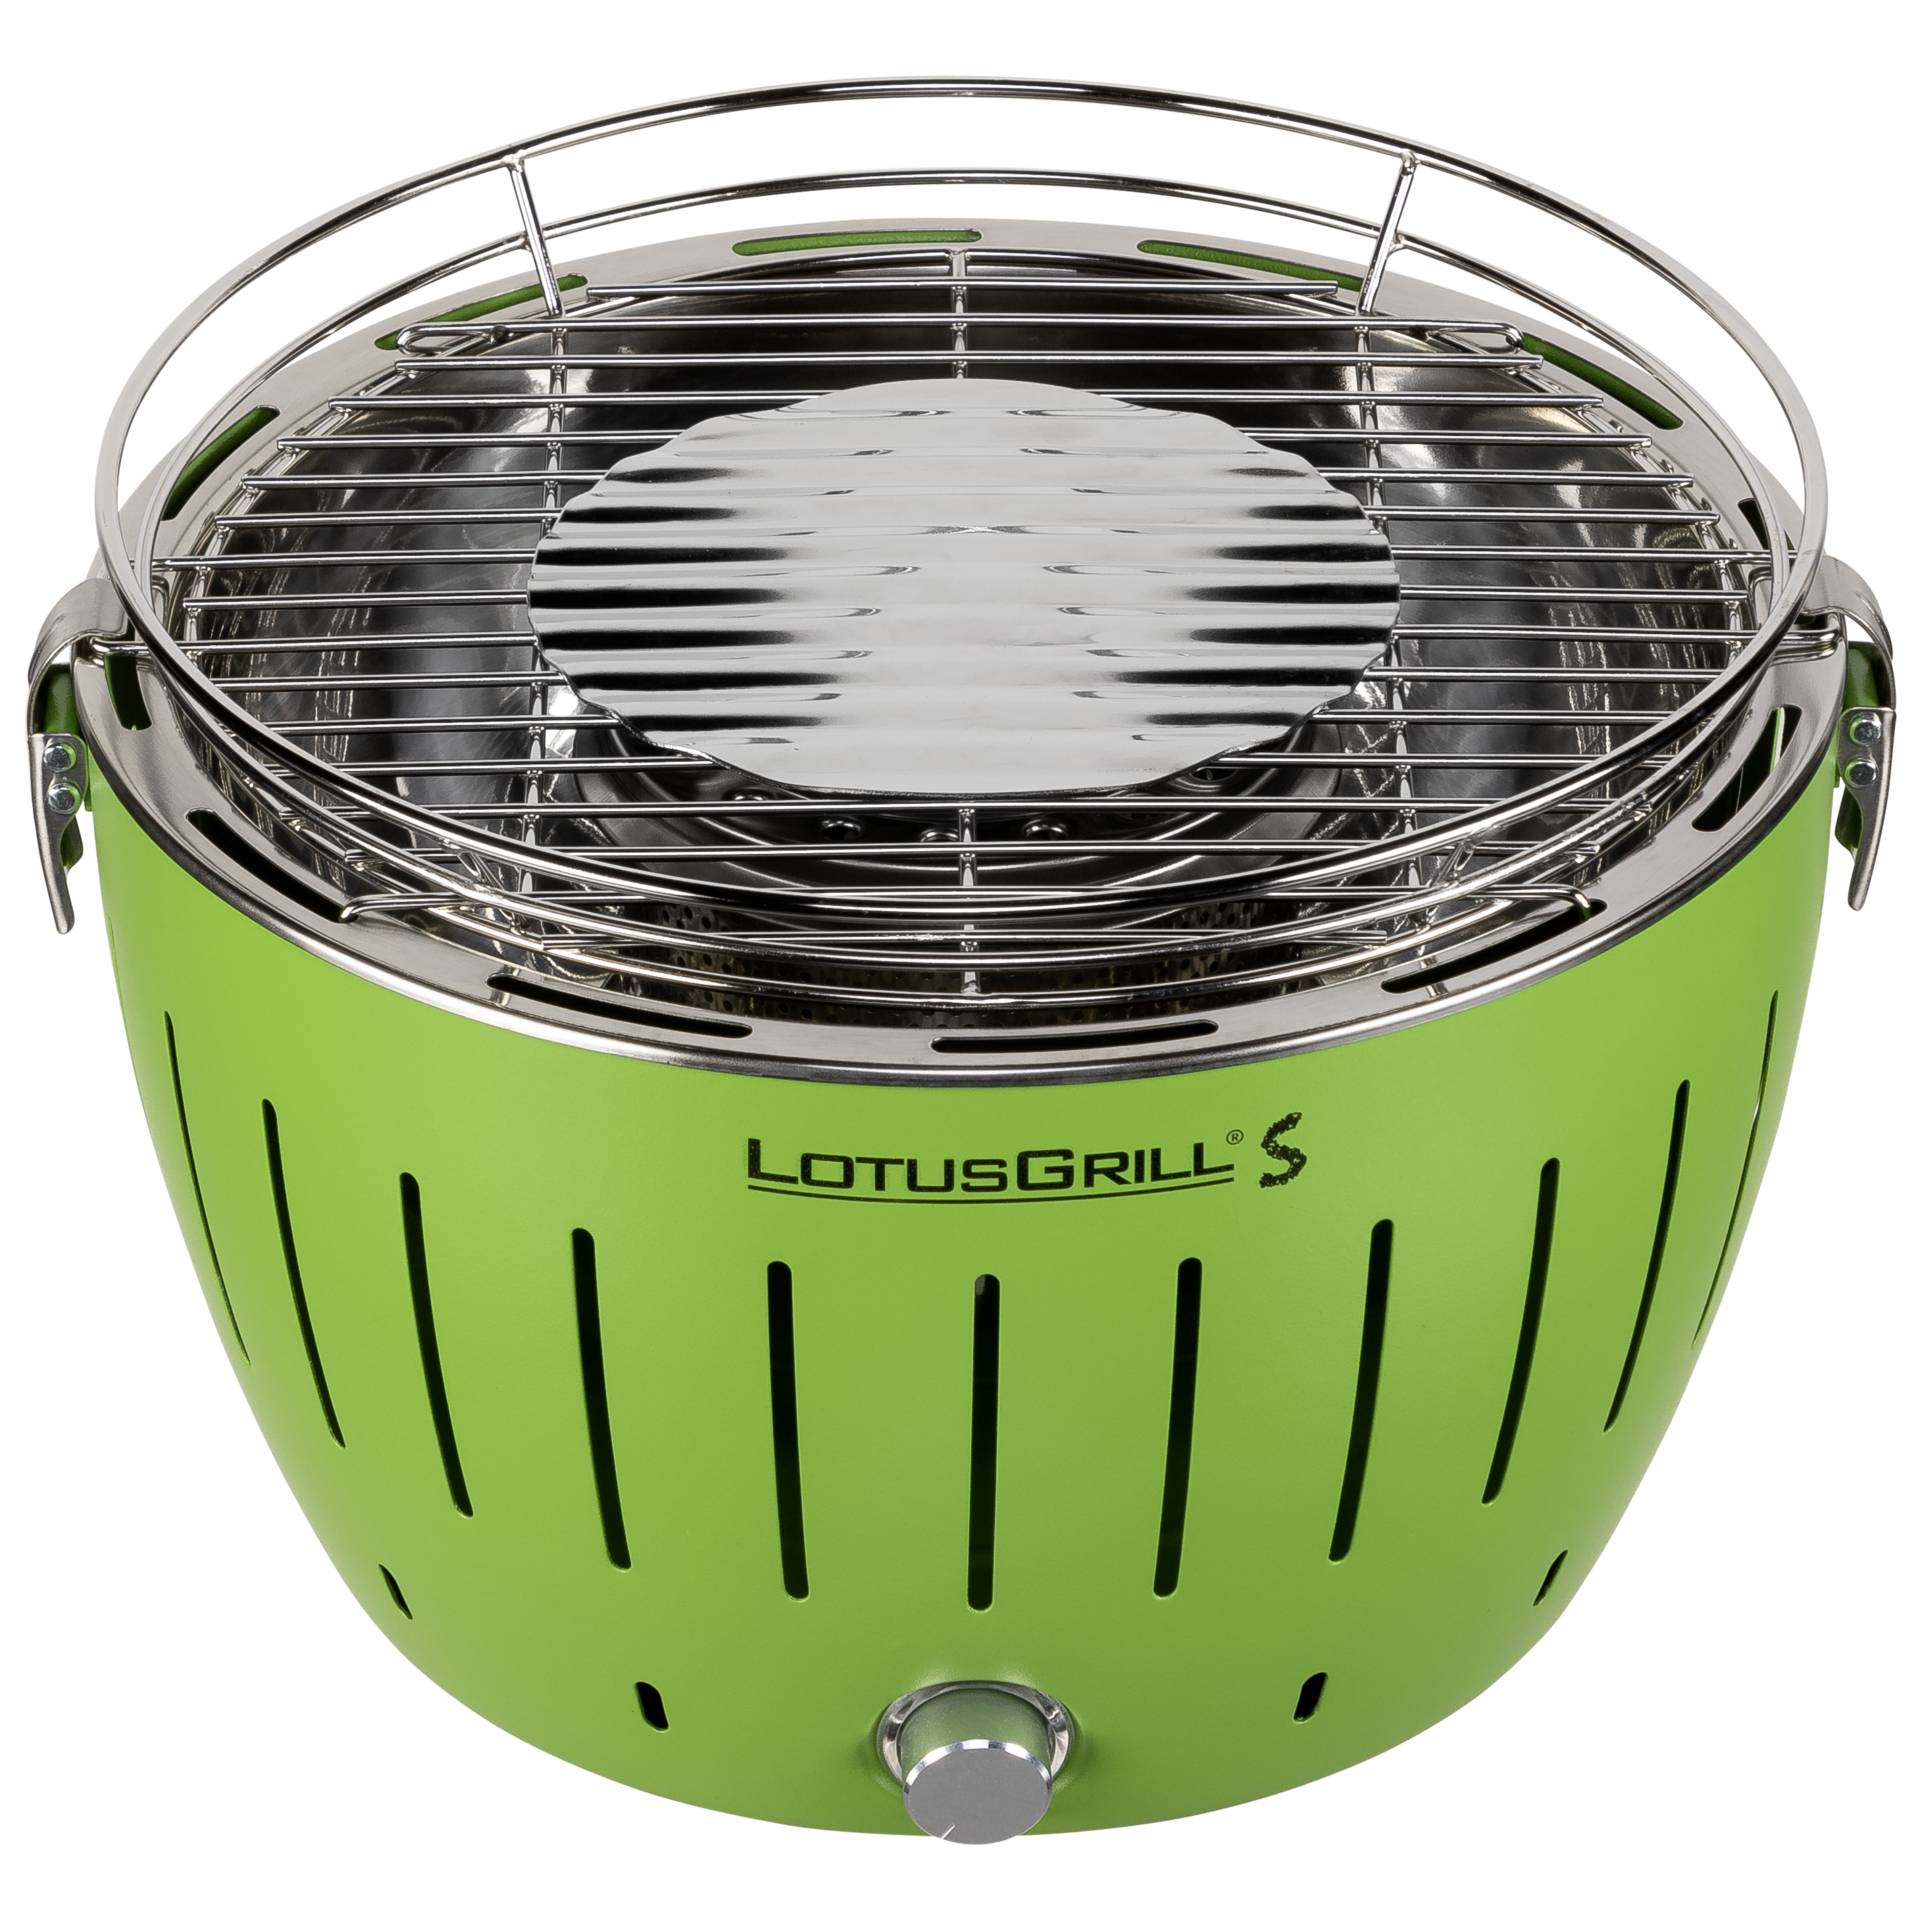 LotusGrill G280 Grill Holzkohle Grün